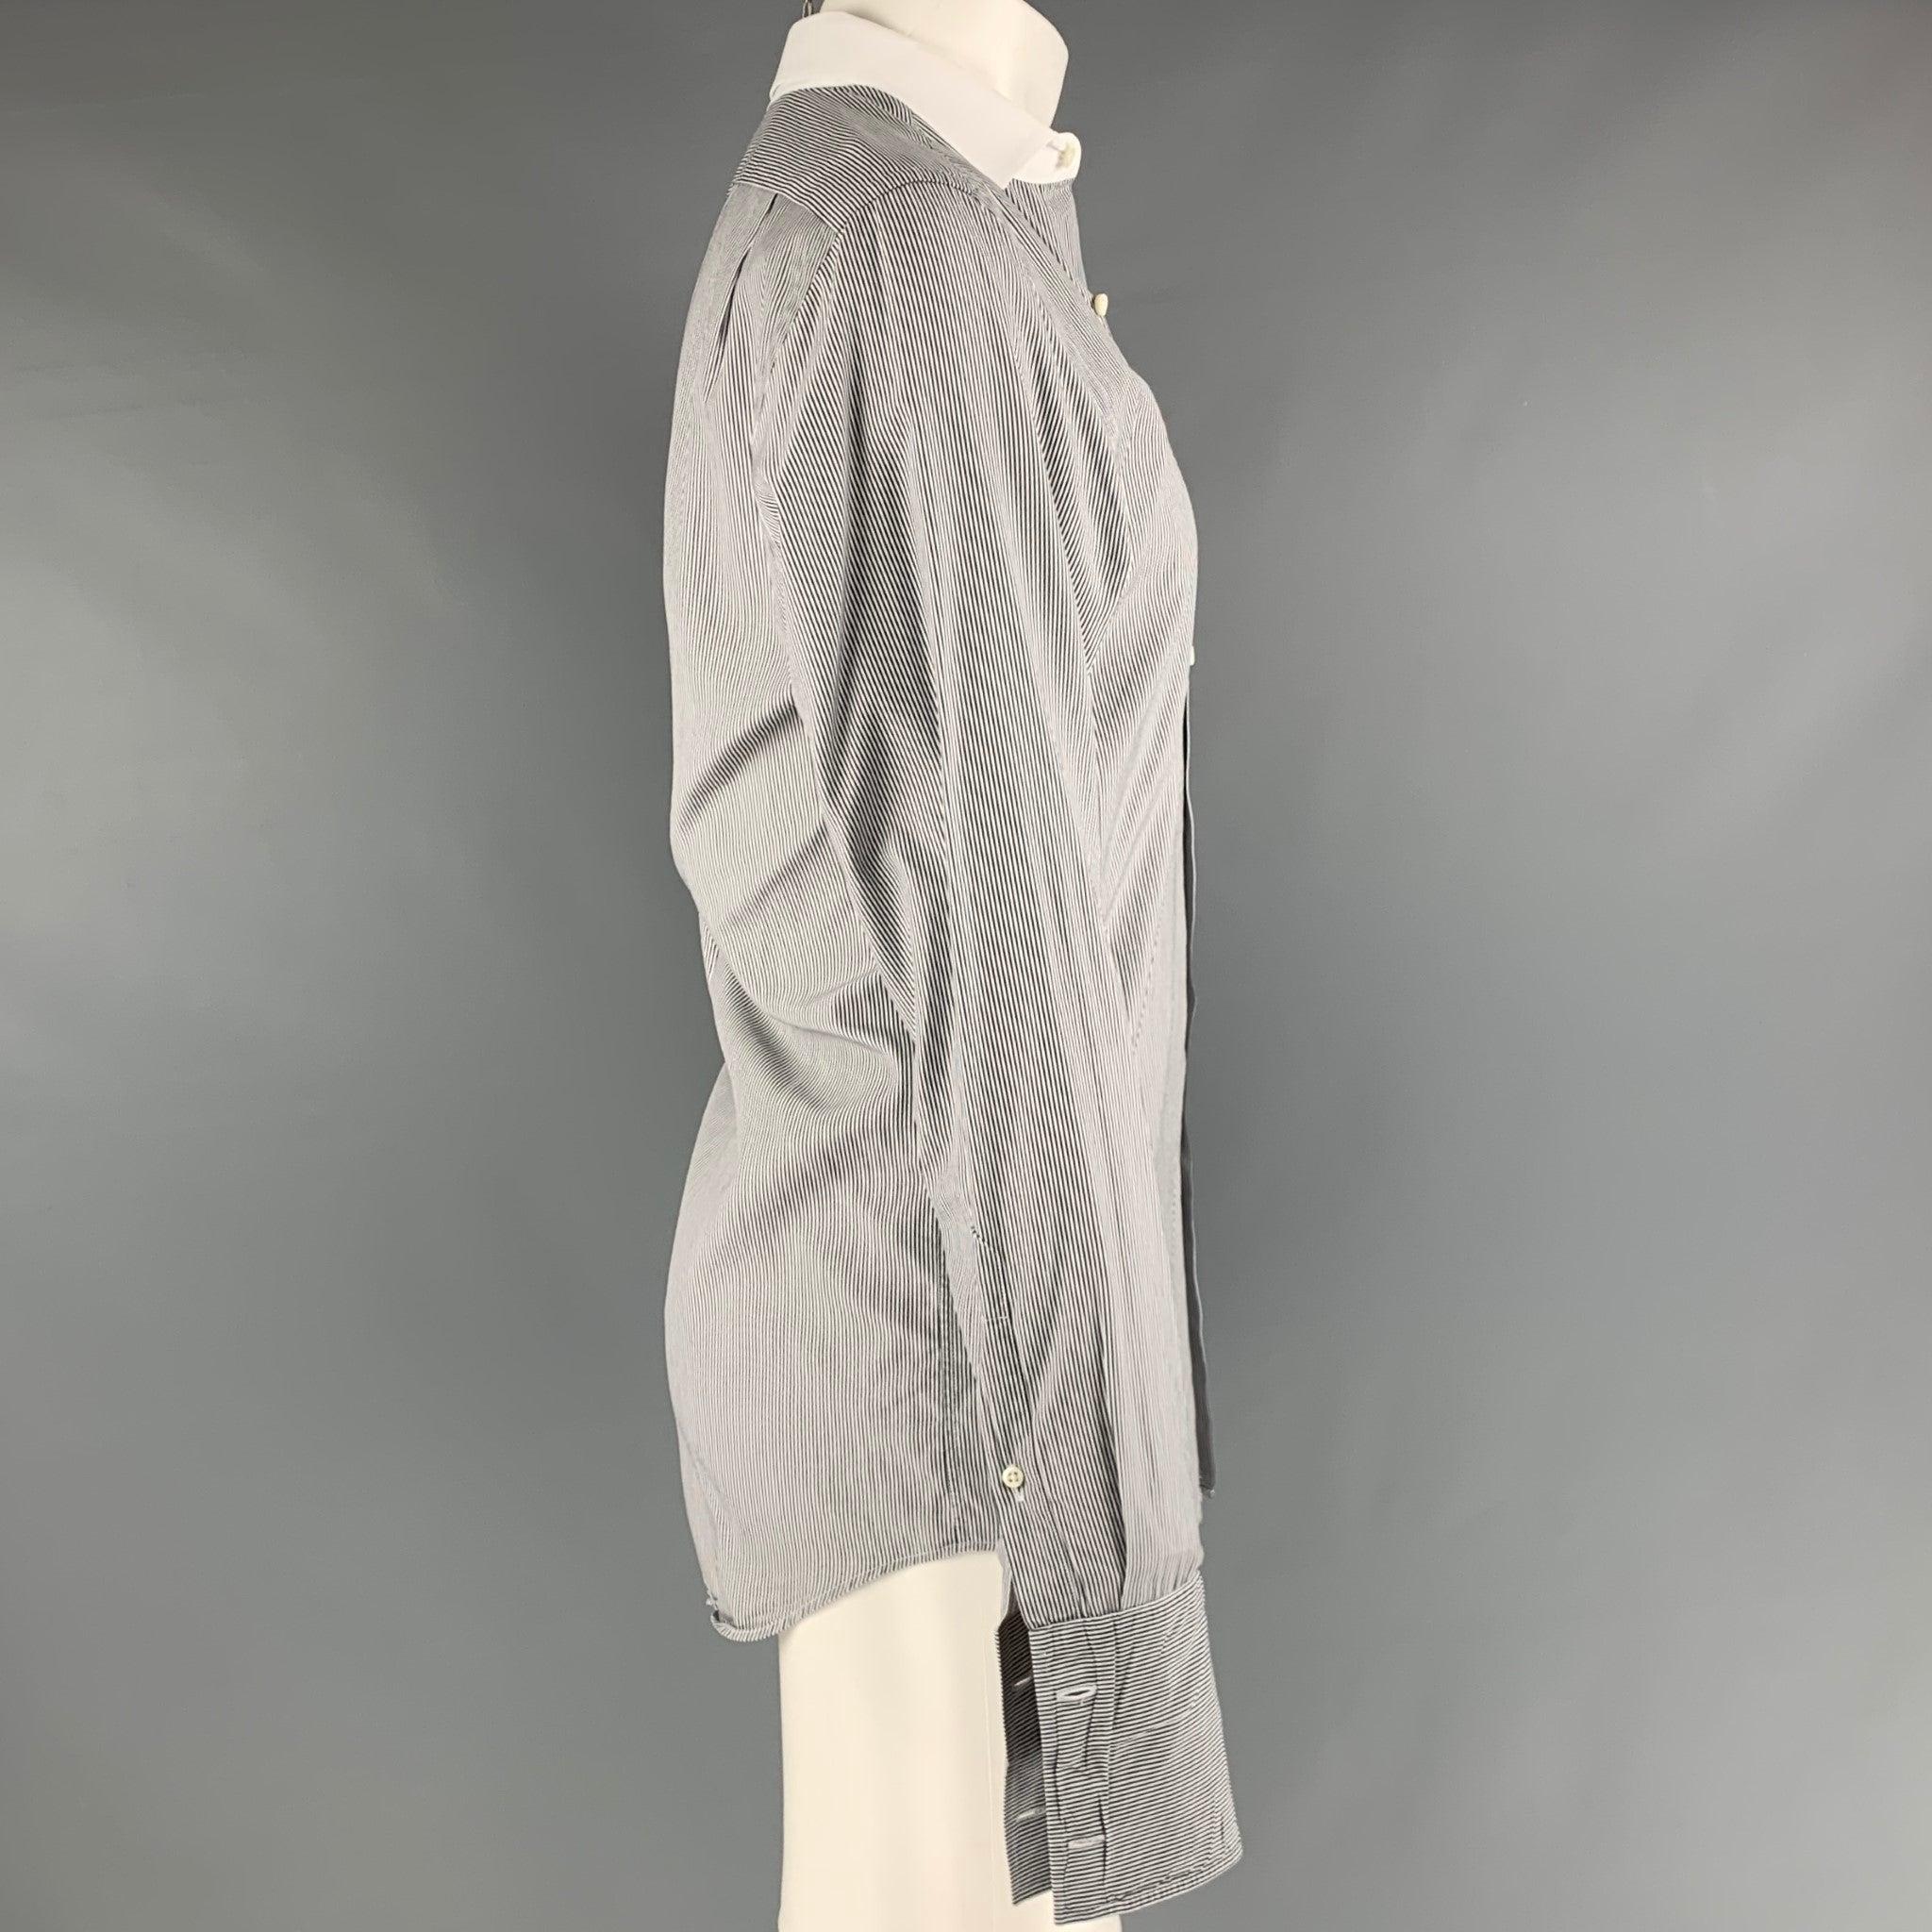 RALPH LAUREN BLACK LABEL long sleeve button down shirt in 100% white cotton, featuring black stripes, French cuffs, white collar, and a button closure.Good Pre-Owned Condition. Tiny holes on back. 

Marked:   16 

Measurements: 
 
Shoulder: 17.5